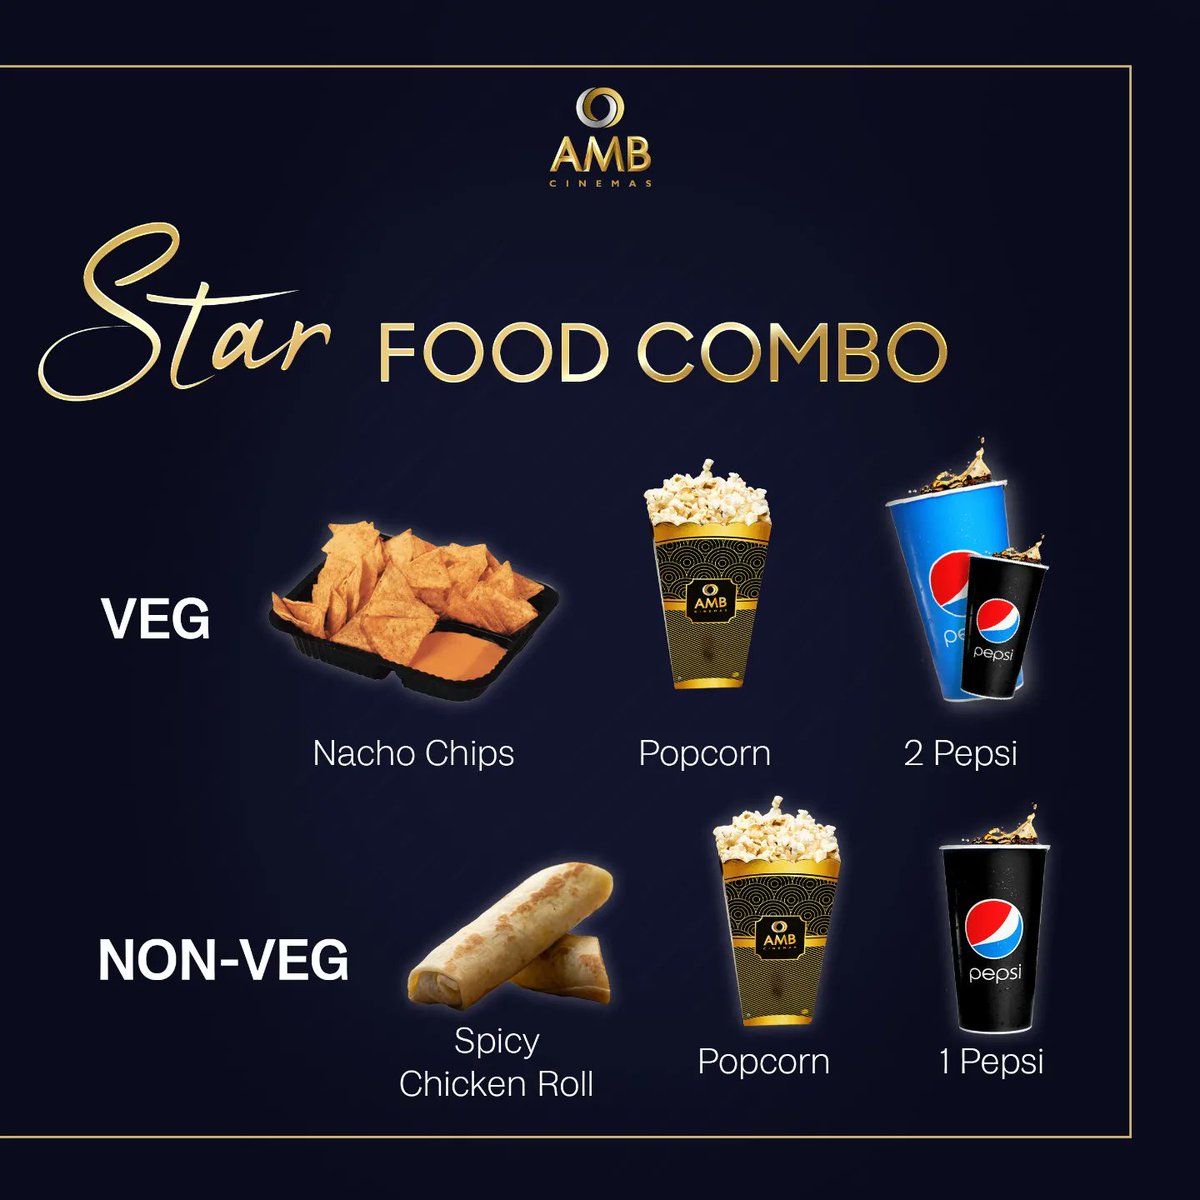 Revealing Tomorrow: The Superstar food combo! 🎂 

A dynamic treat that's sure to set ablaze your cinematic experience only at AMB!

#MaheshBabu𓃵 #SSMB #MaheshBabuBdayCDP #superstarcombo #AMBCinemas